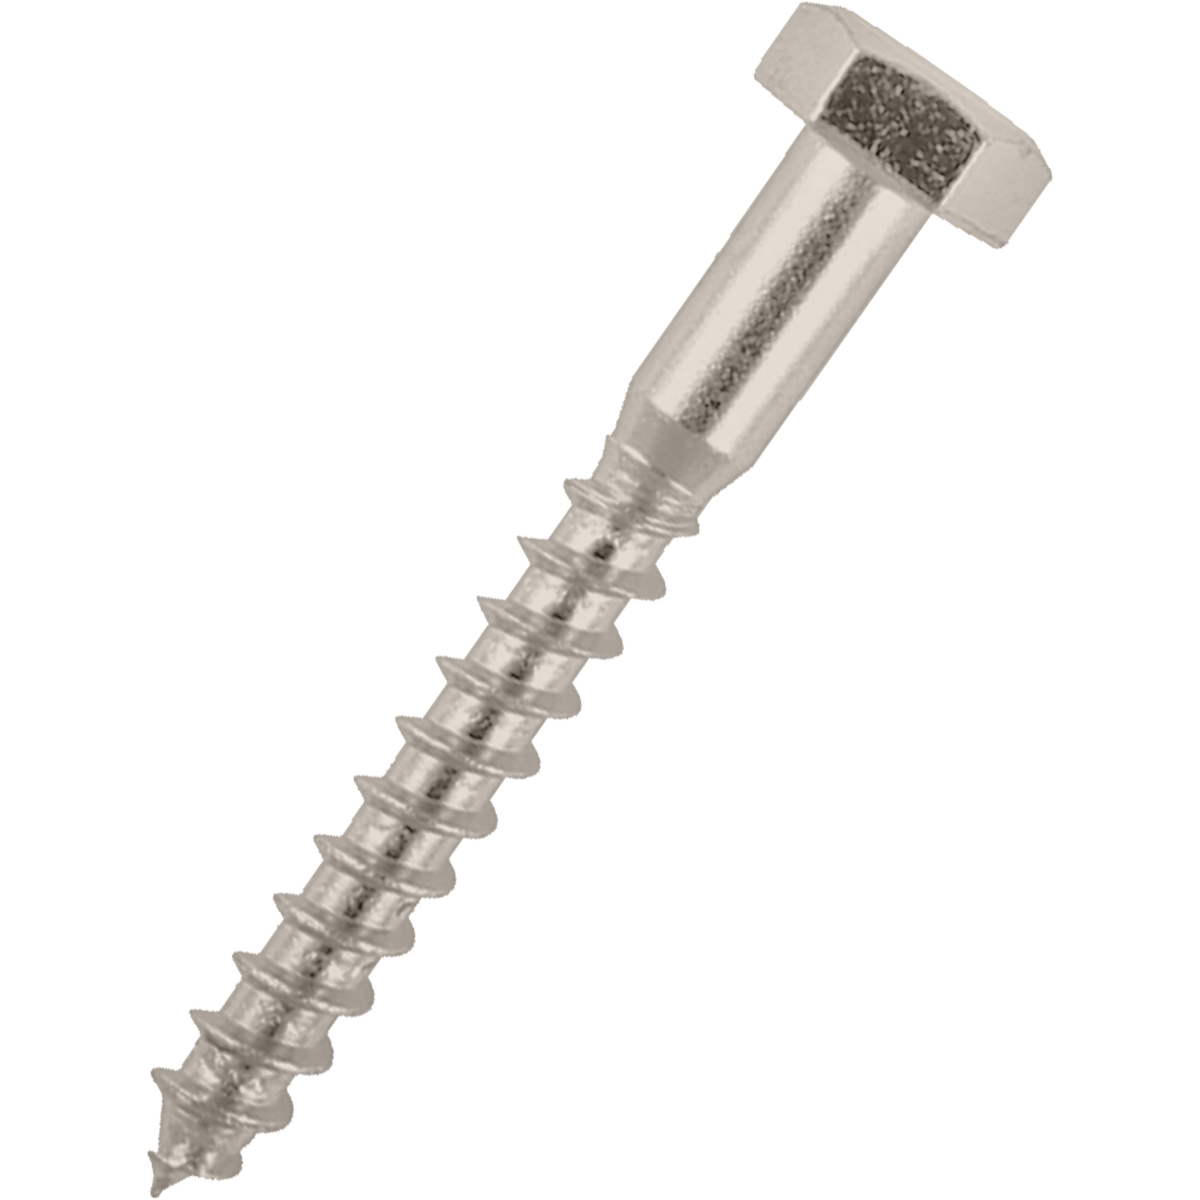 Corrosion resistant hex head coach screws, a heavy duty wood screw that are also known as lag screws or lag bolts. Part of a growing range of coach screws from Fusion Fixings